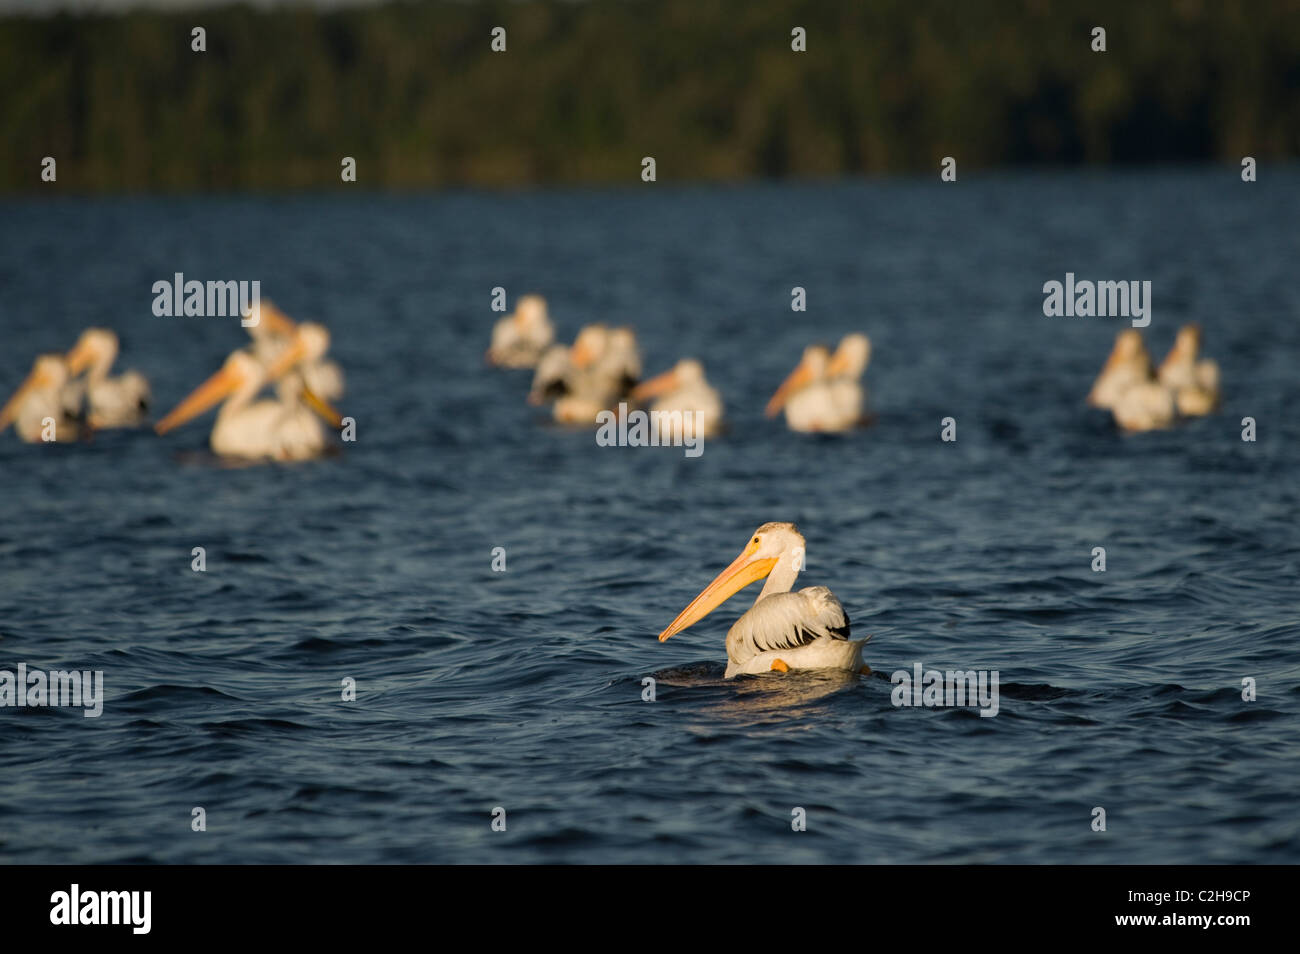 Lake Of The Woods, Ontario, Canada; Pelicans On The Water Stock Photo